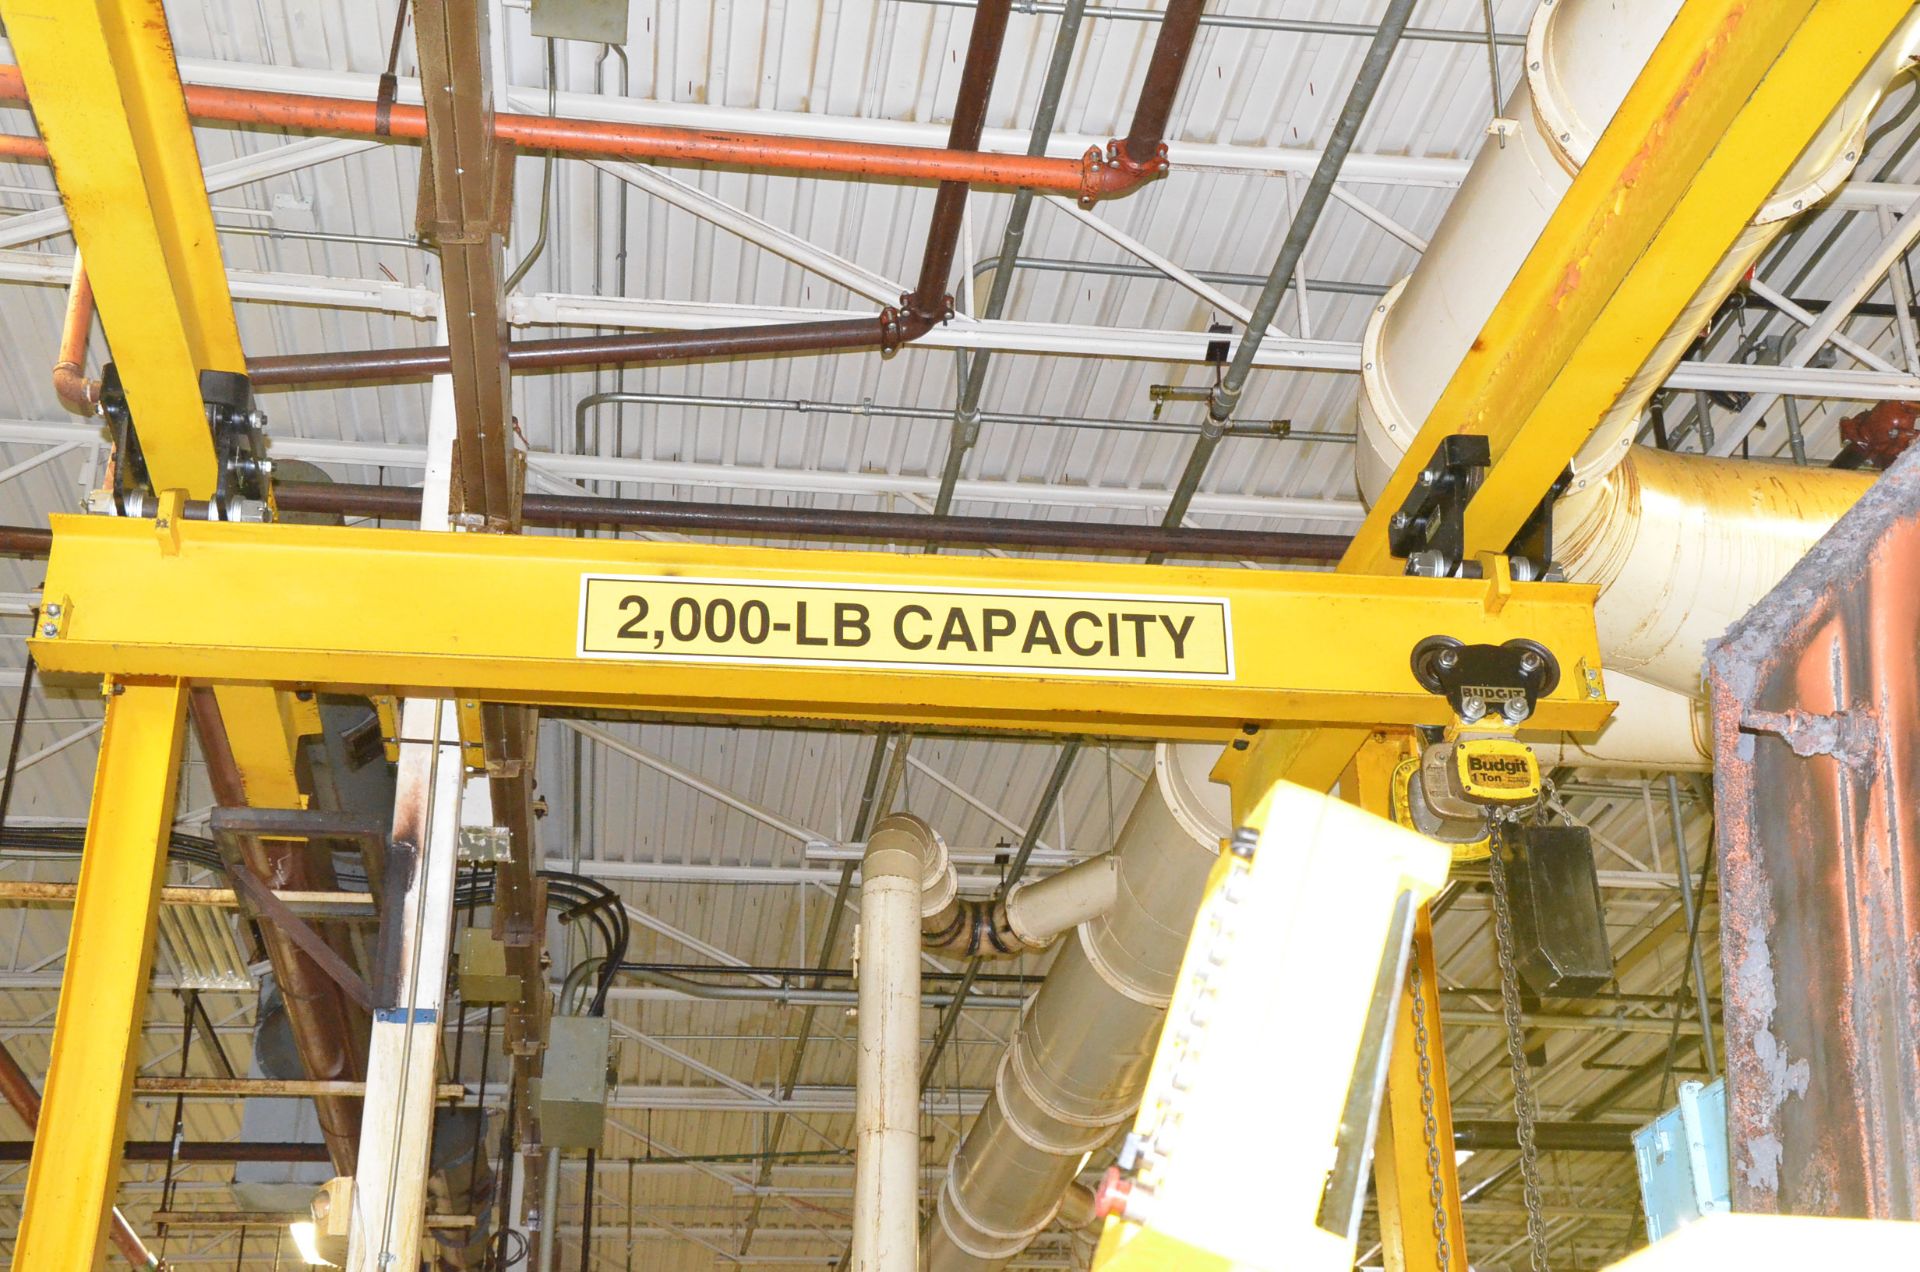 MFG UNKNOWN 2,000 LBS CAPACITY FREESTANDING GANTRY CRANE SYSTEM WITH APPROX 140" SPAN, 160" - Image 2 of 3